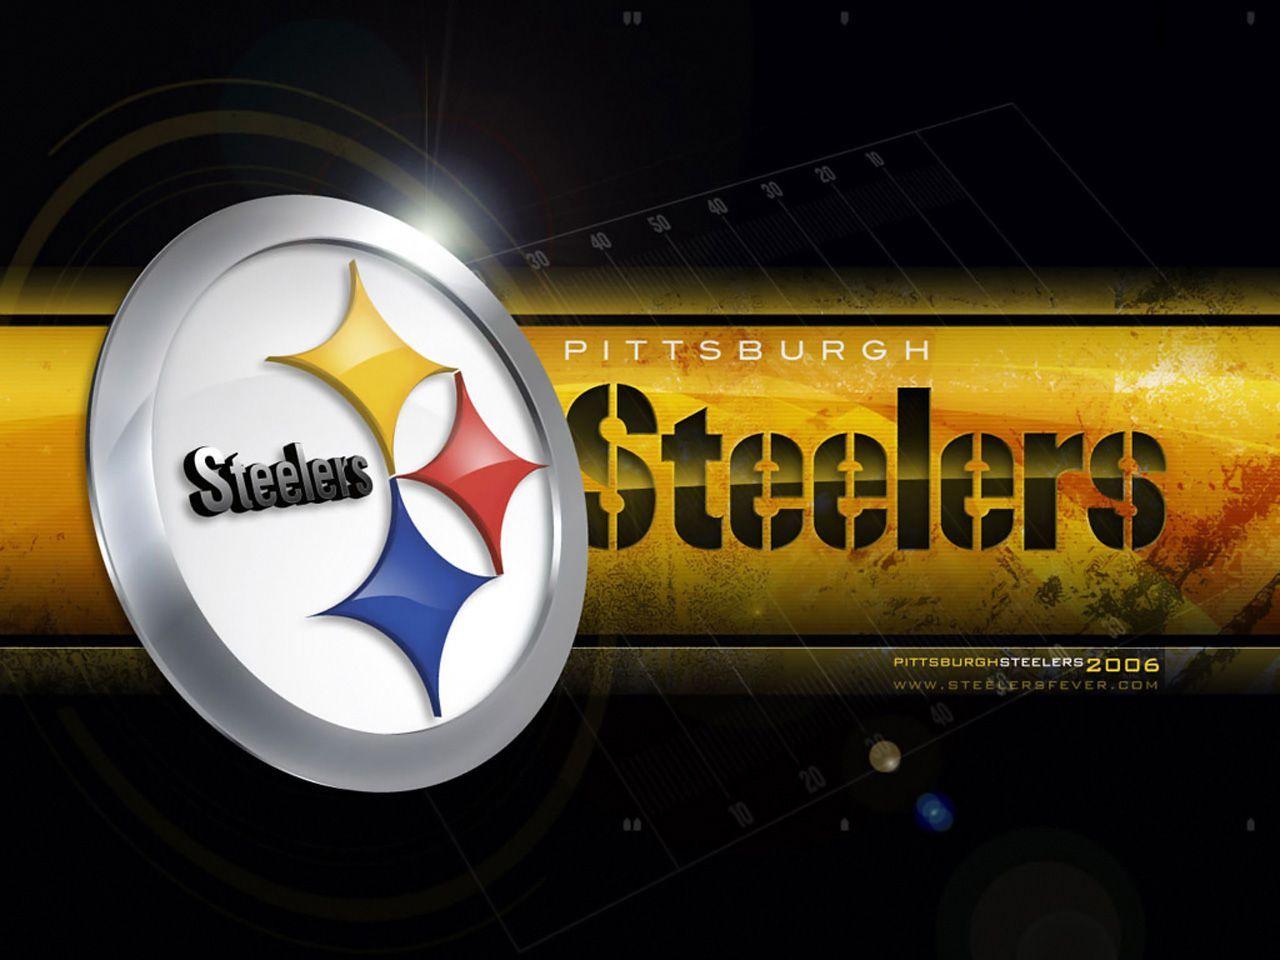 The best Pittsburgh Steelers wallpaper ever??. Pittsburgh